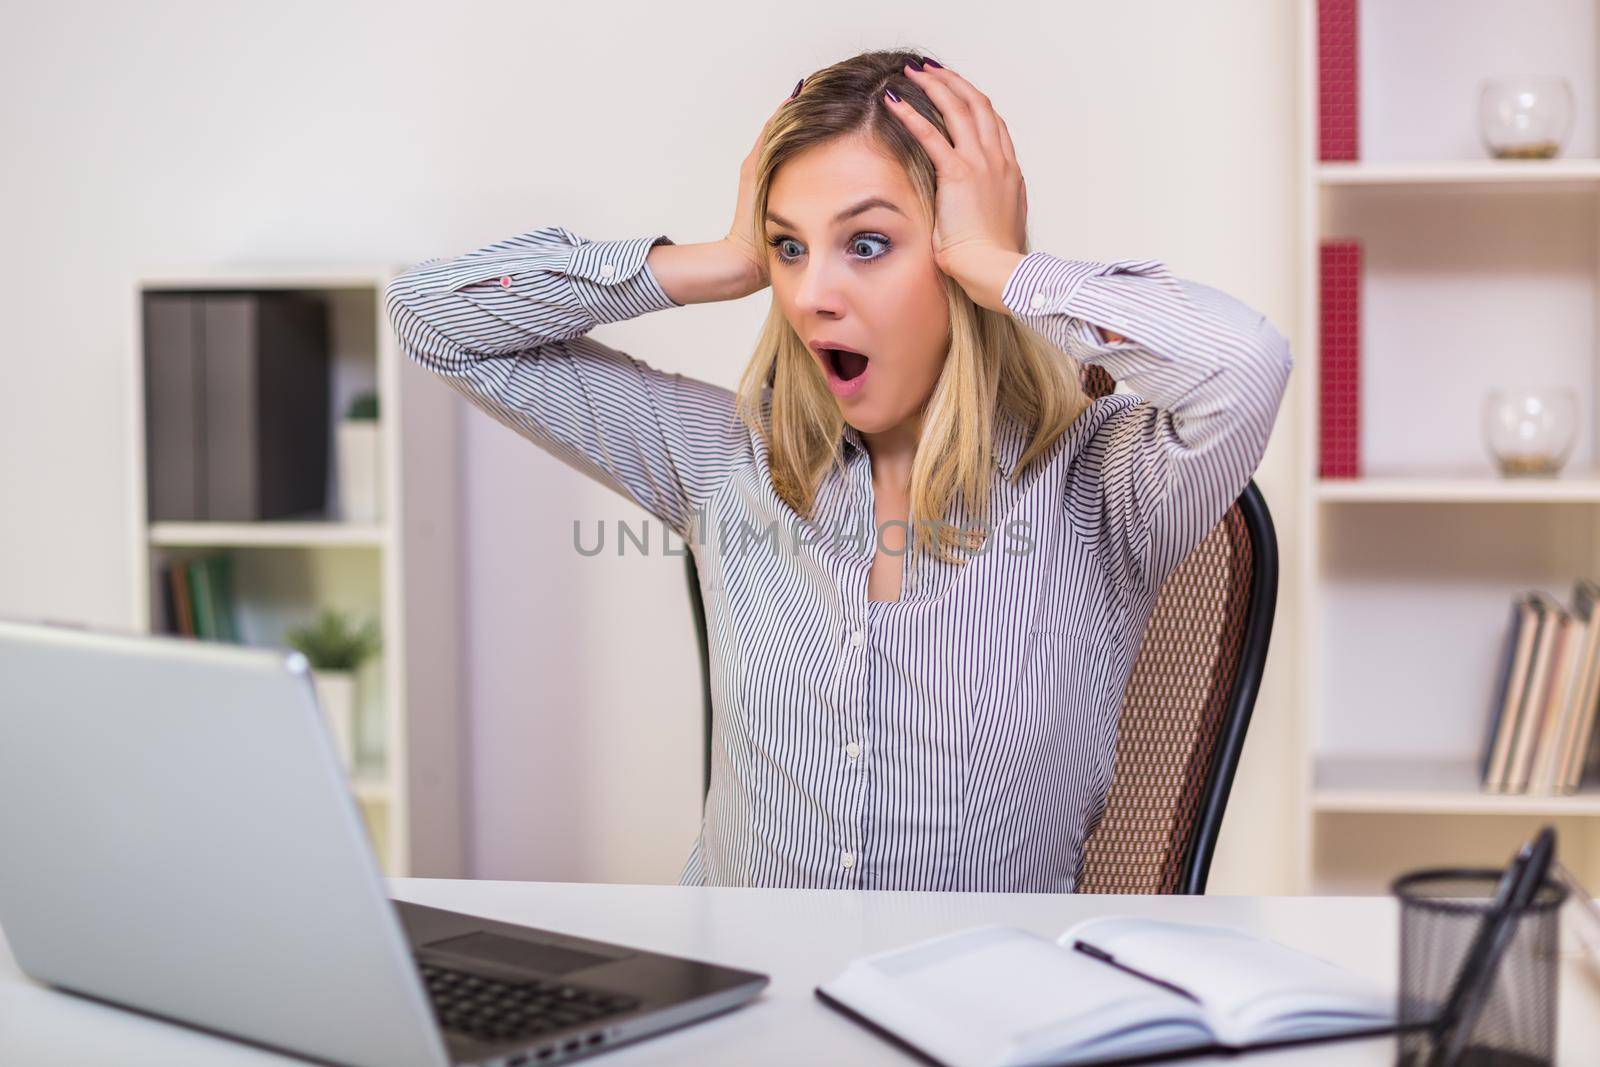 Businesswoman in panic looking at laptop while working in her office.